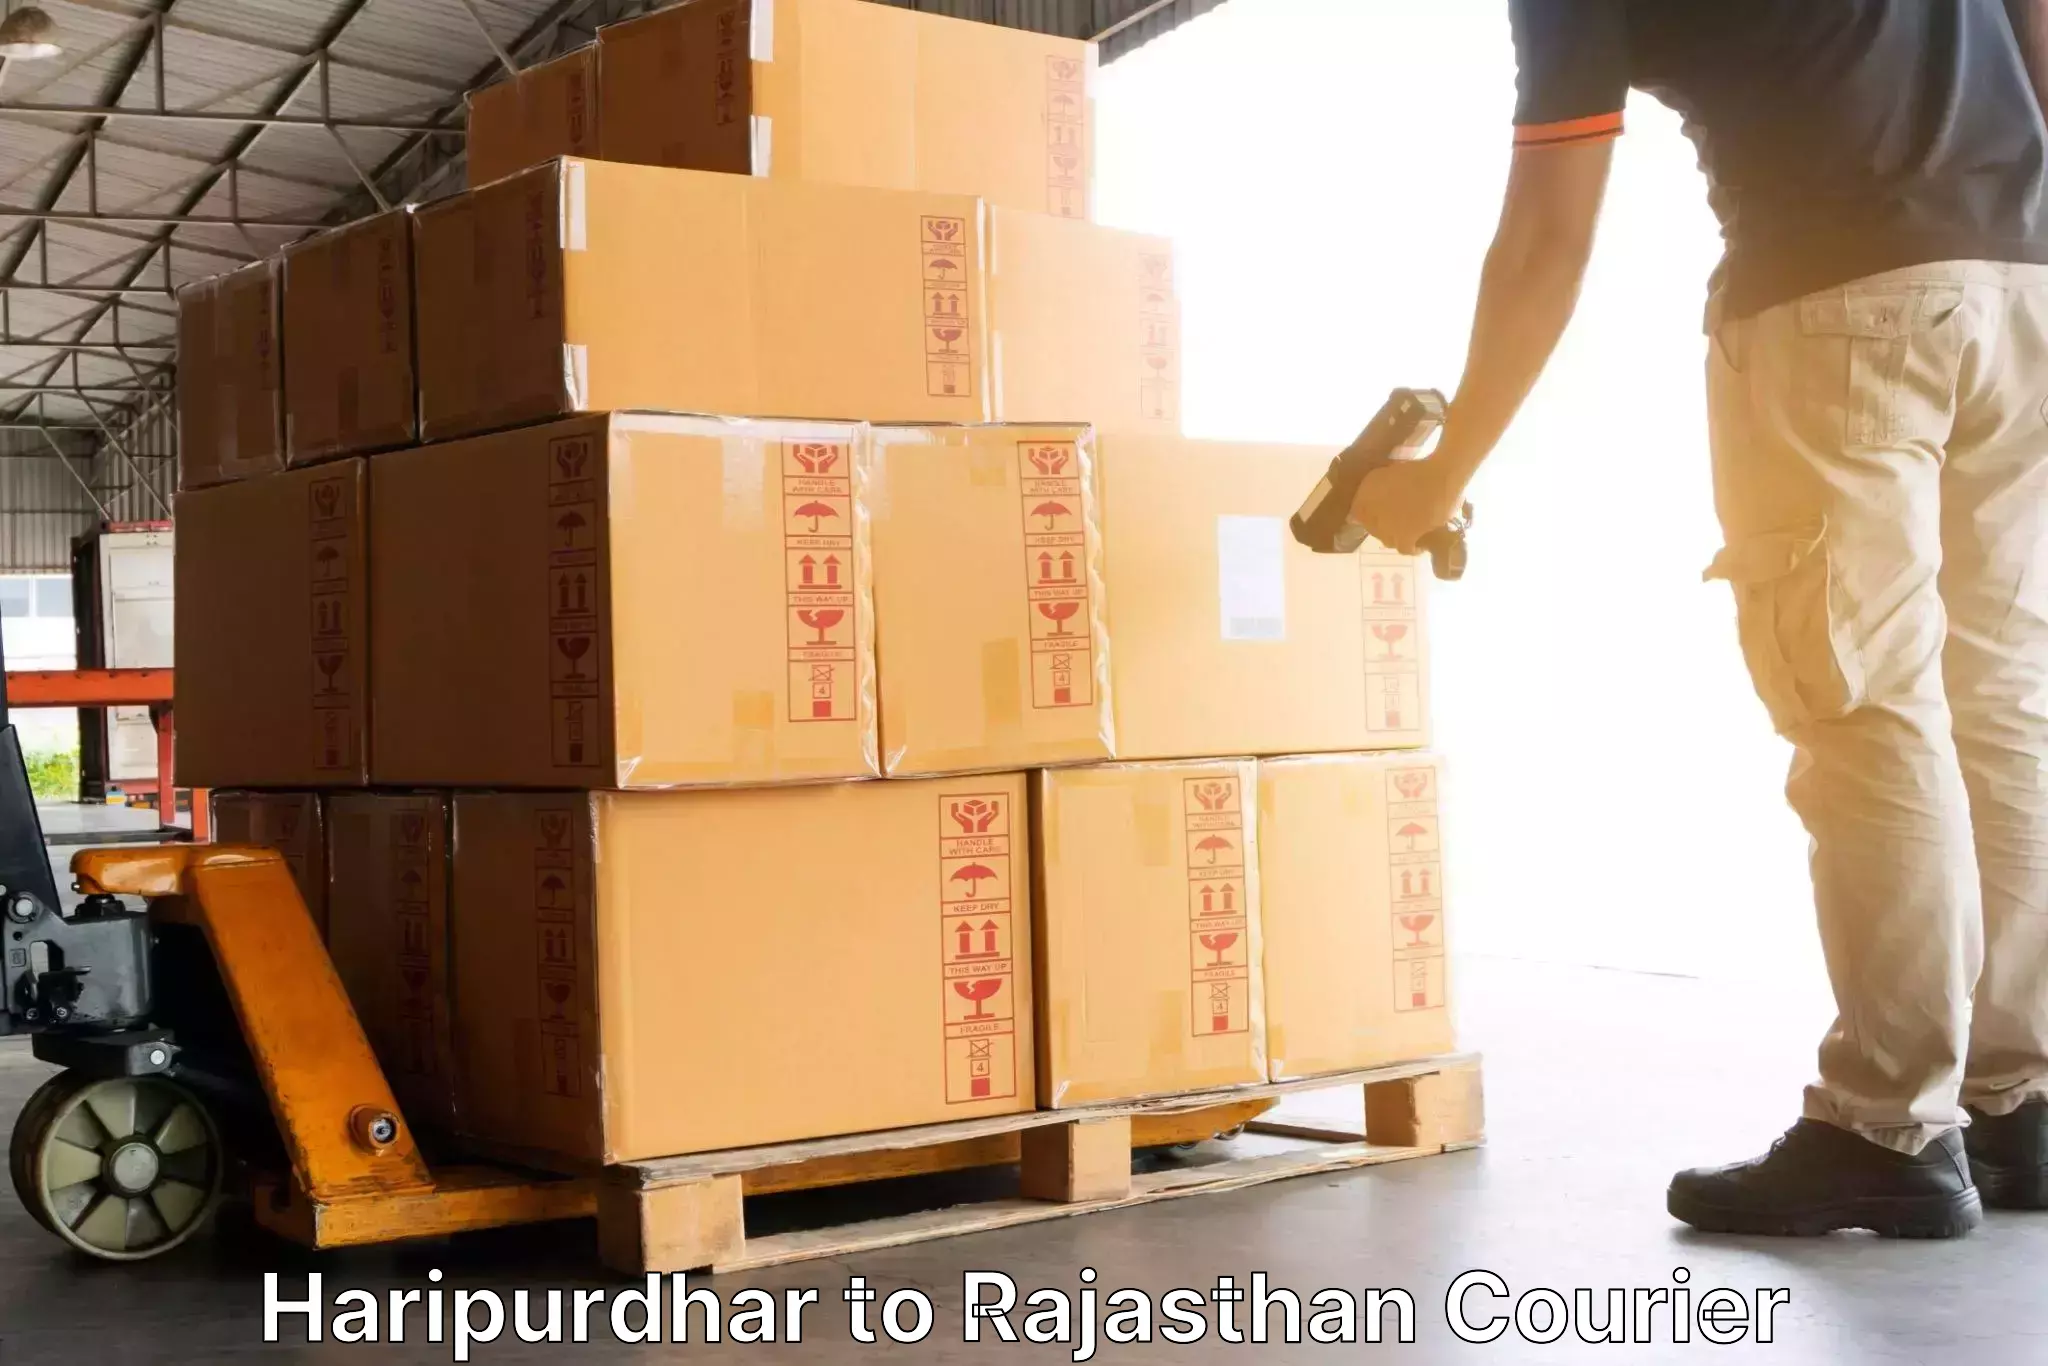 Courier service booking Haripurdhar to Pali